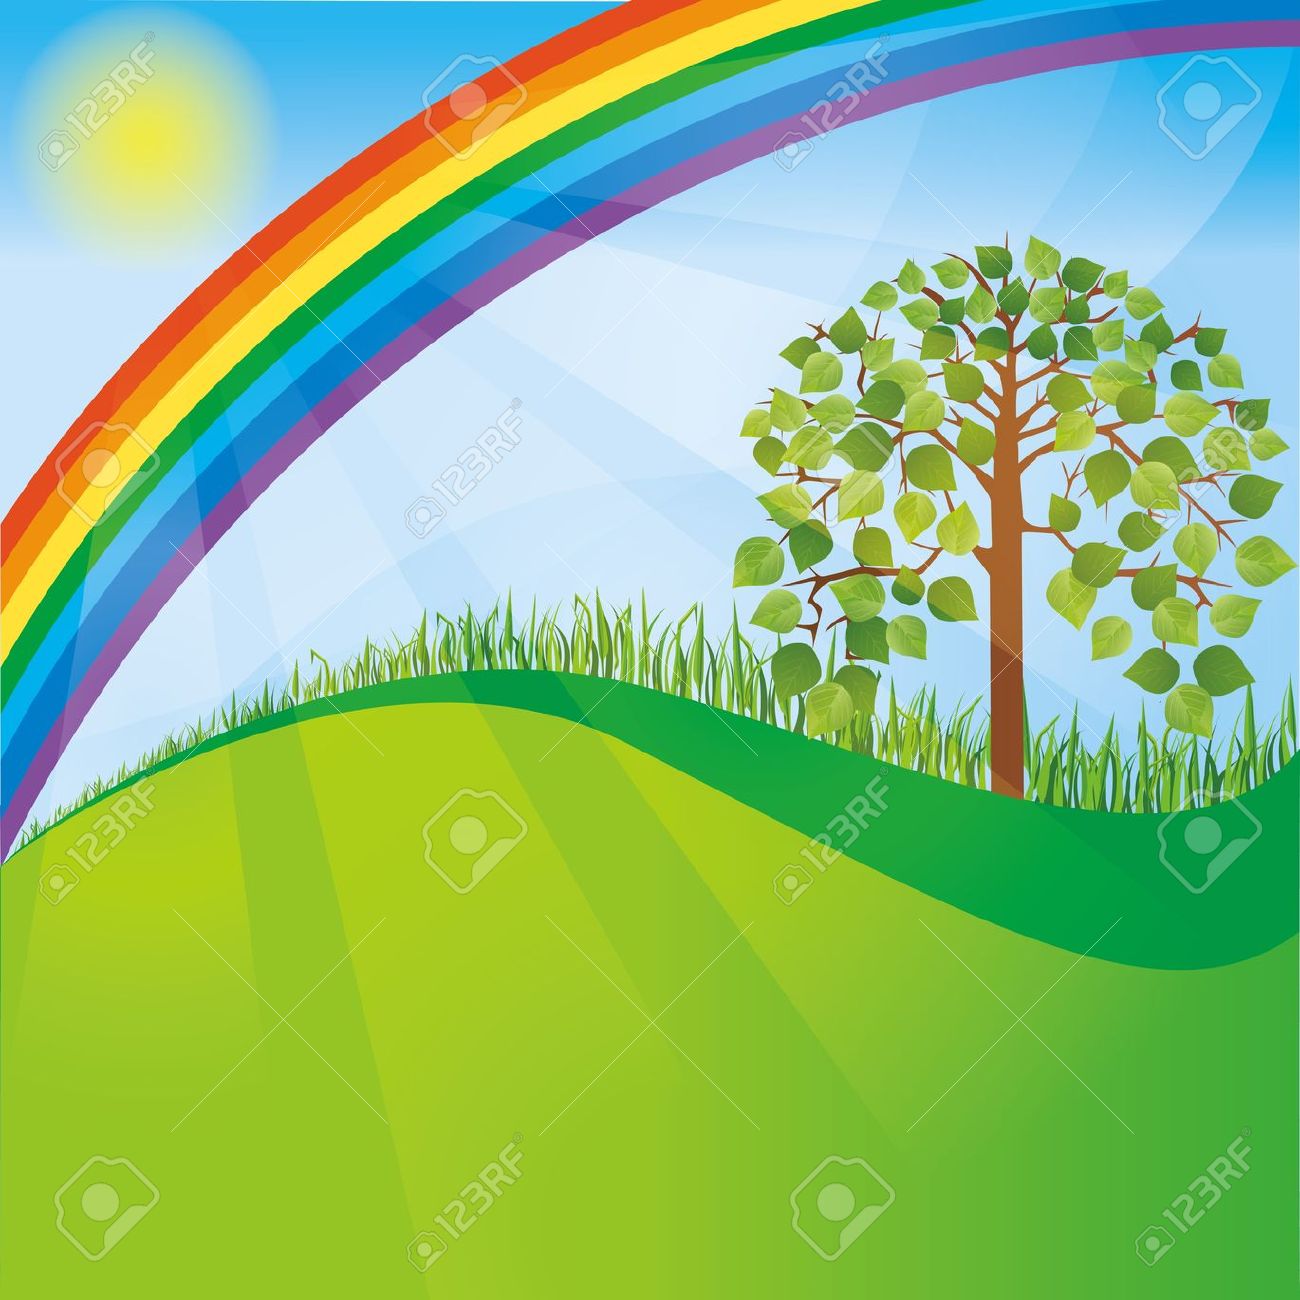 Free Rainbow Background Cliparts, Download Free Clip Art